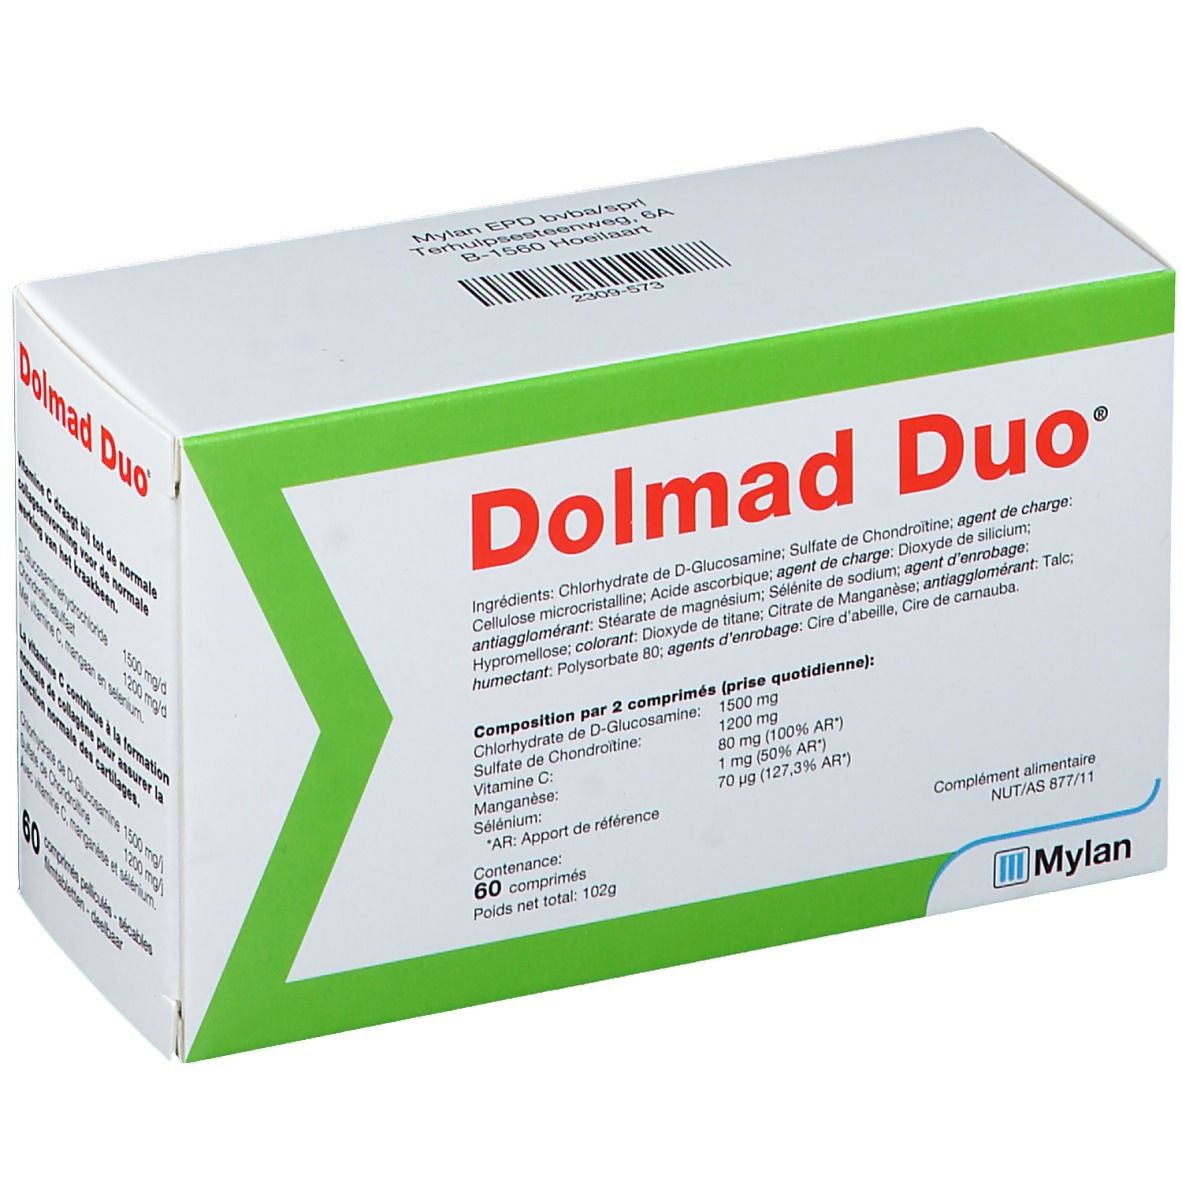 Image of Dolmad Duo®